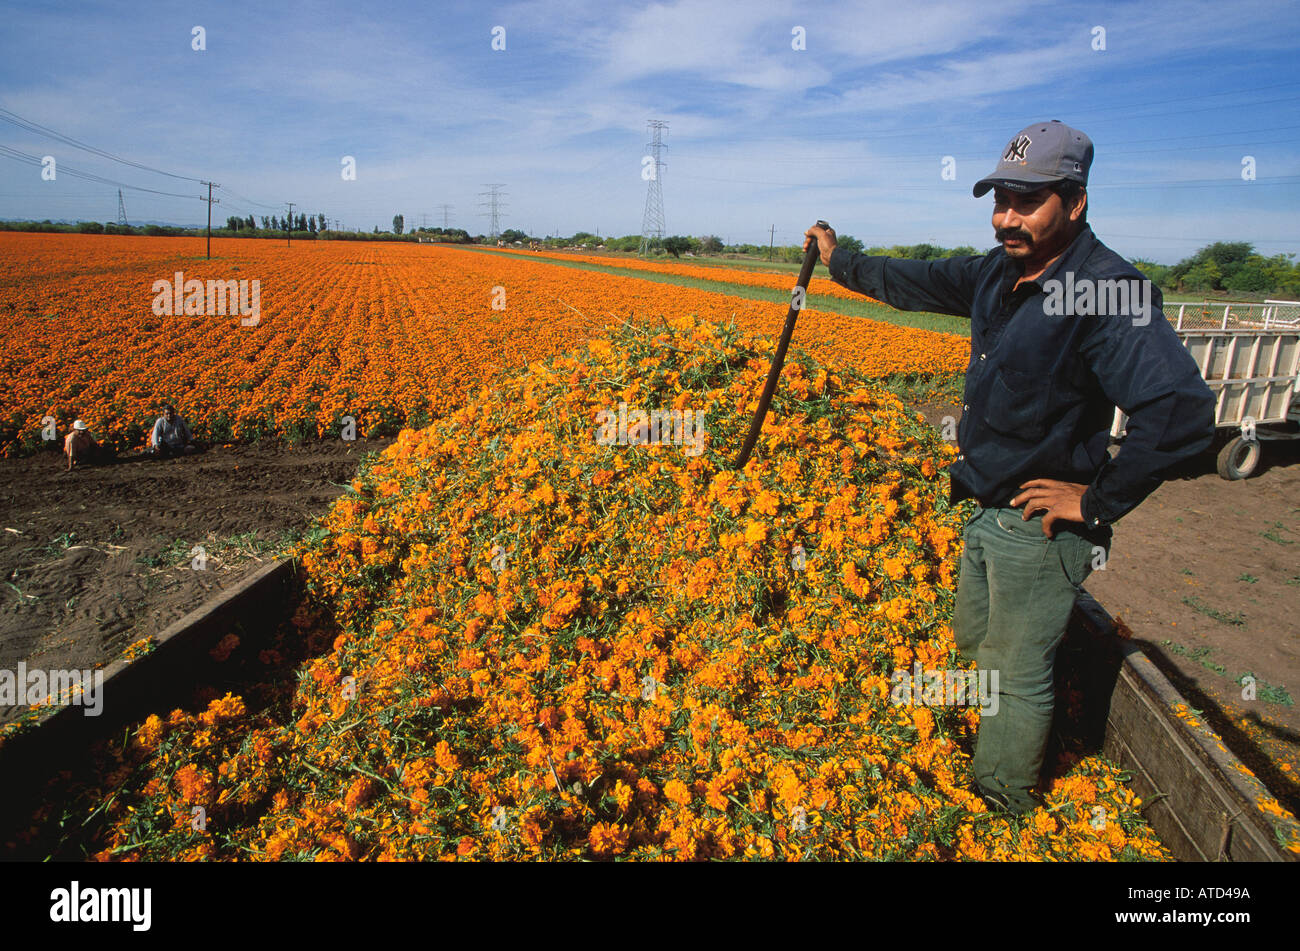 A worker stands in a truck full of harvested marigolds used in chicken feed in the desert are near Los Mochis Mexico Stock Photo